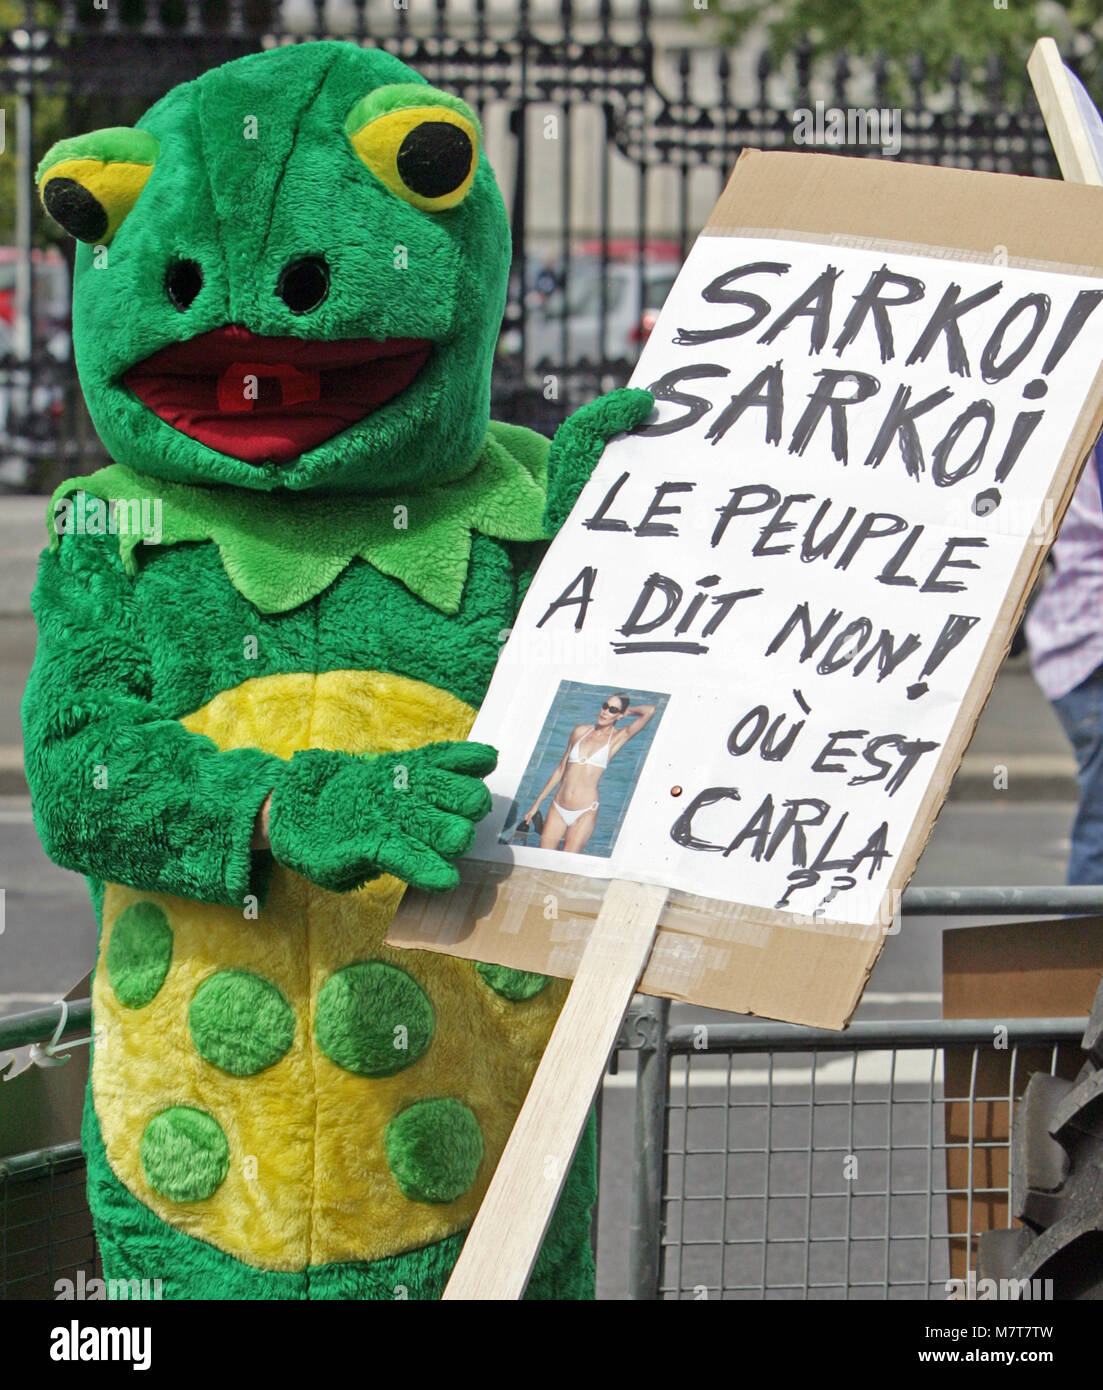 A protestor dressed as a frog, demonstrates against the visit of Nicolas Sarkozy, France's president and president of the European Council in Dublin, Ireland, on Monday, July 21, 2008. Sarkozy met the two main opposition leaders - Fine Gael's Enda Kenny and Labour's Eamon Gilmore and talks with groups who opposed and supported the Lisbon Treaty. Photo/Paul McErlane Stock Photo